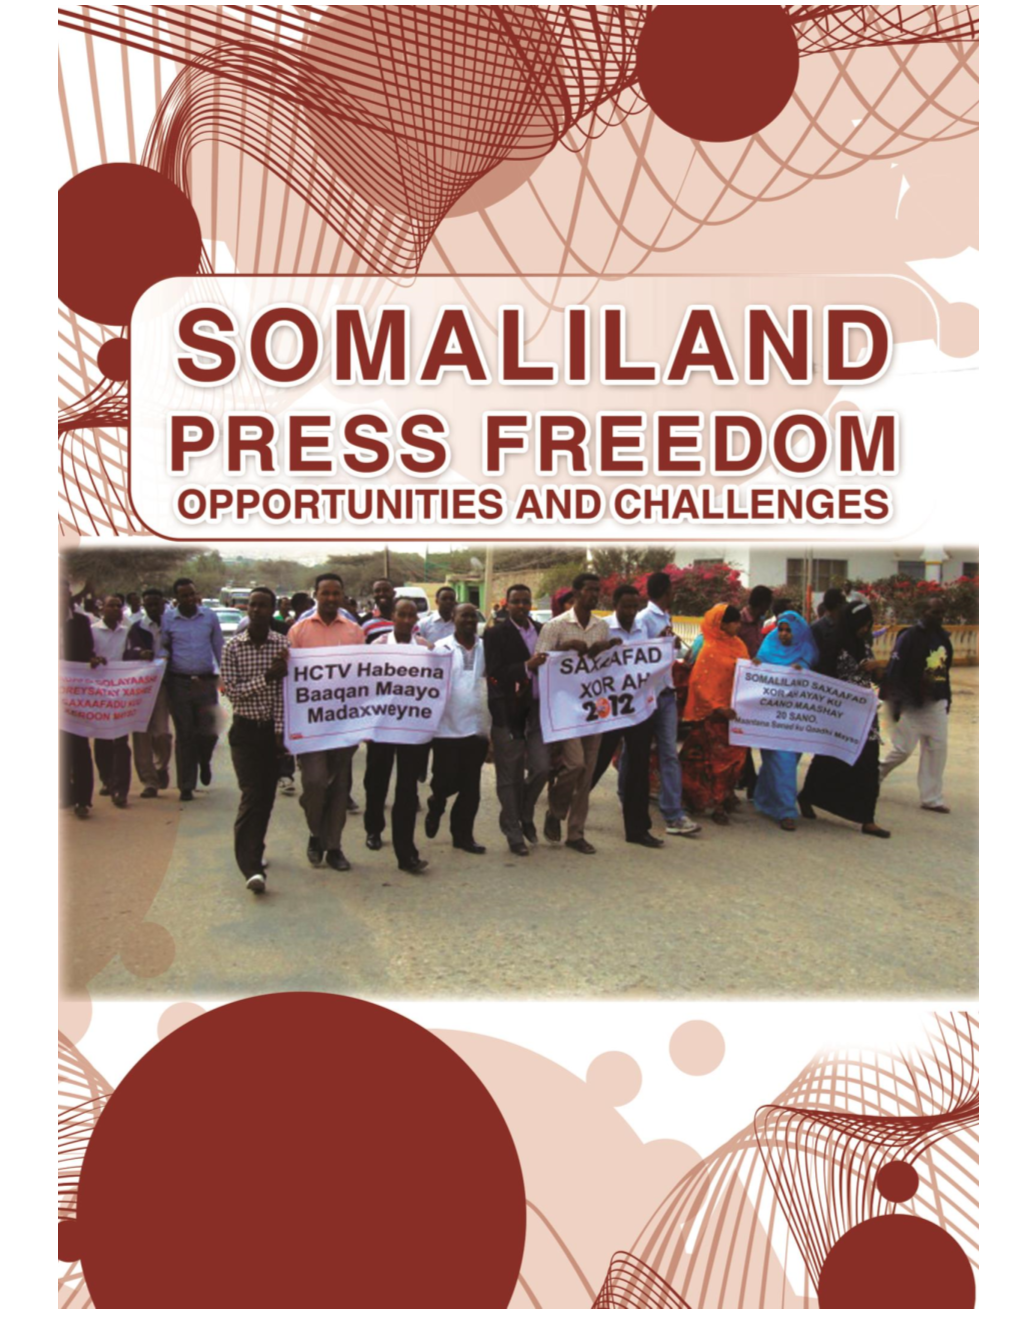 Somaliland Press Freedom: Opportunities and Challenges